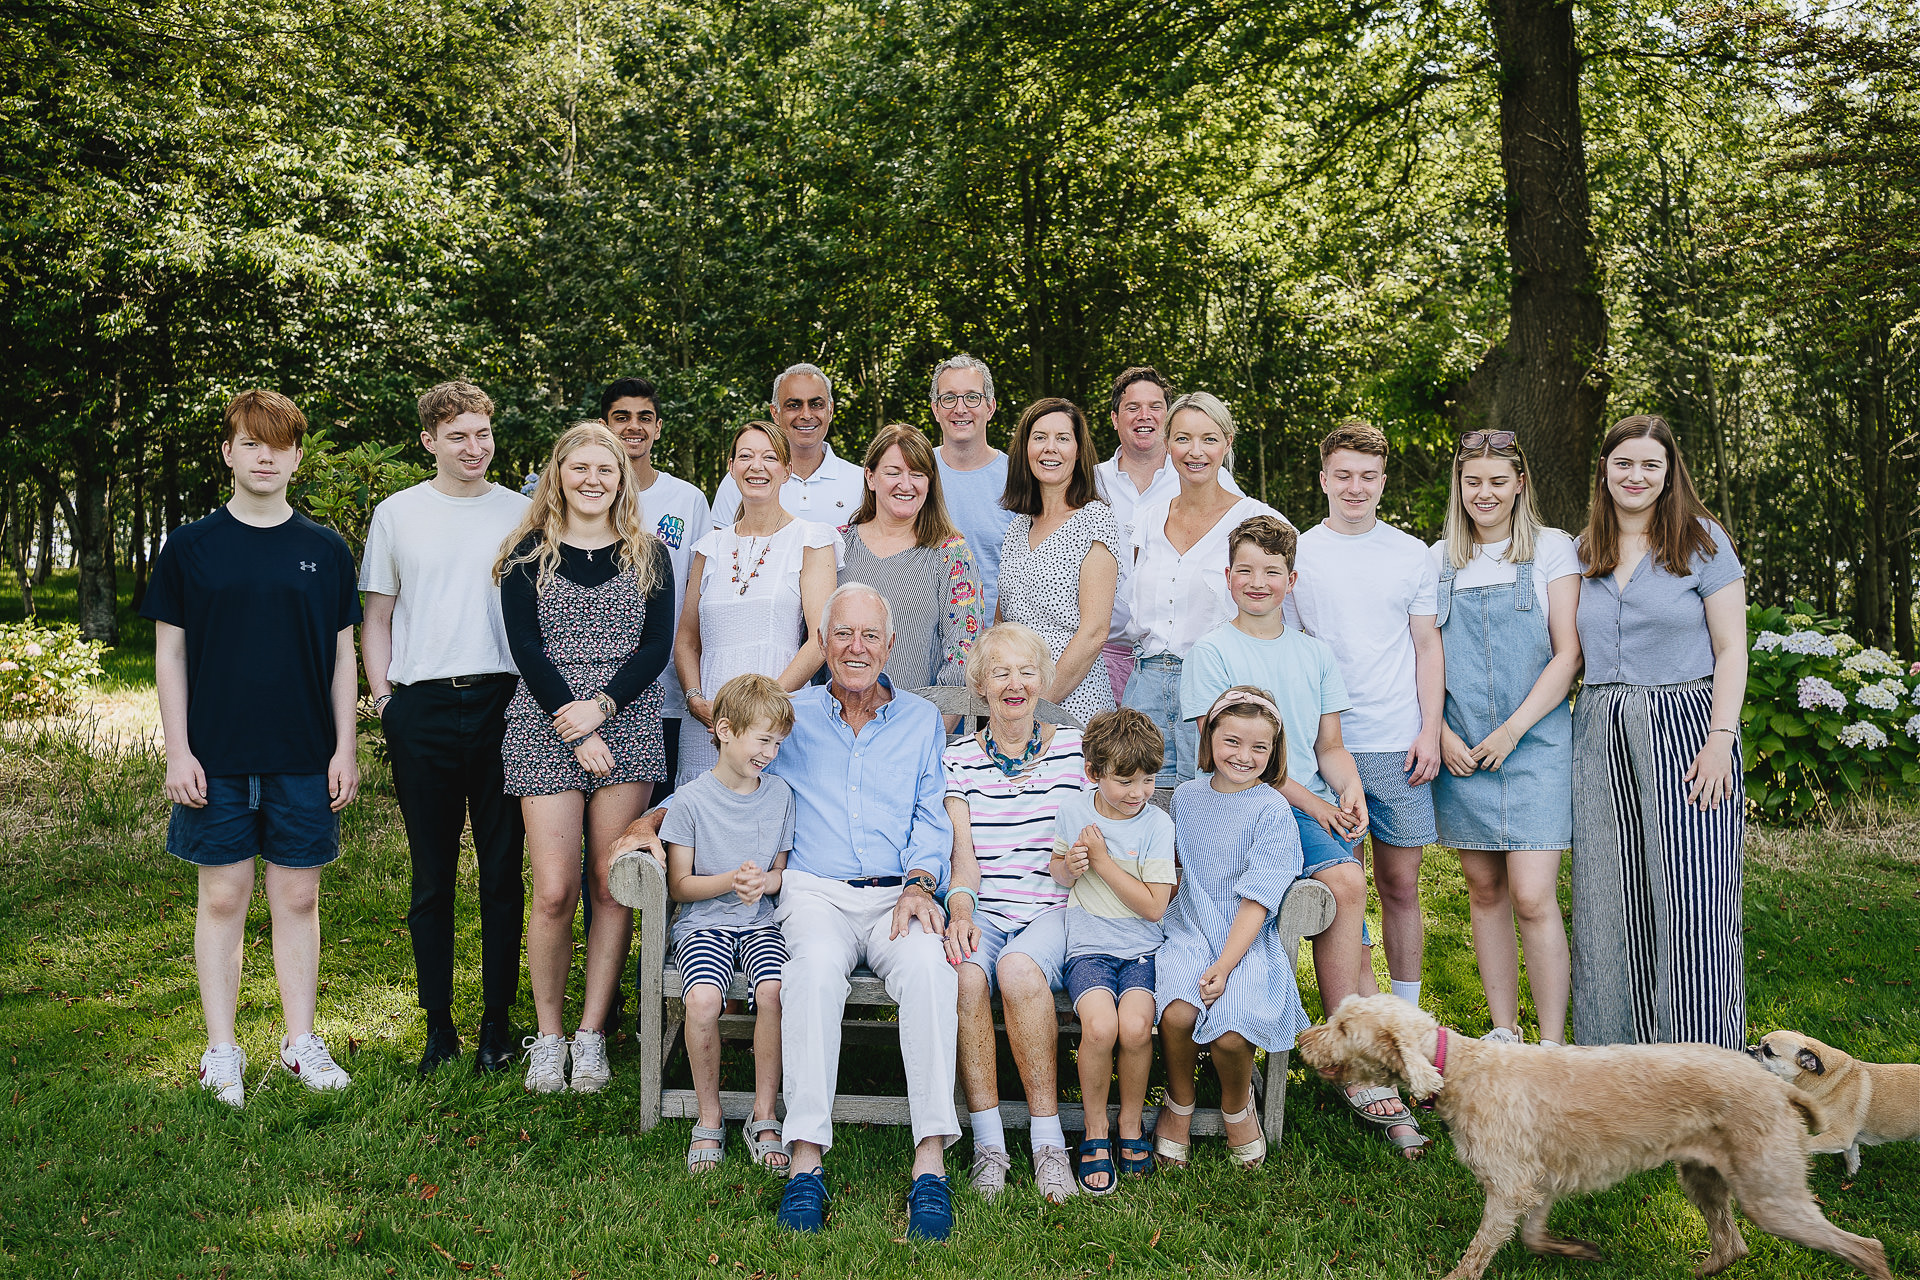 A large extended family photography group photo with dogs walking past